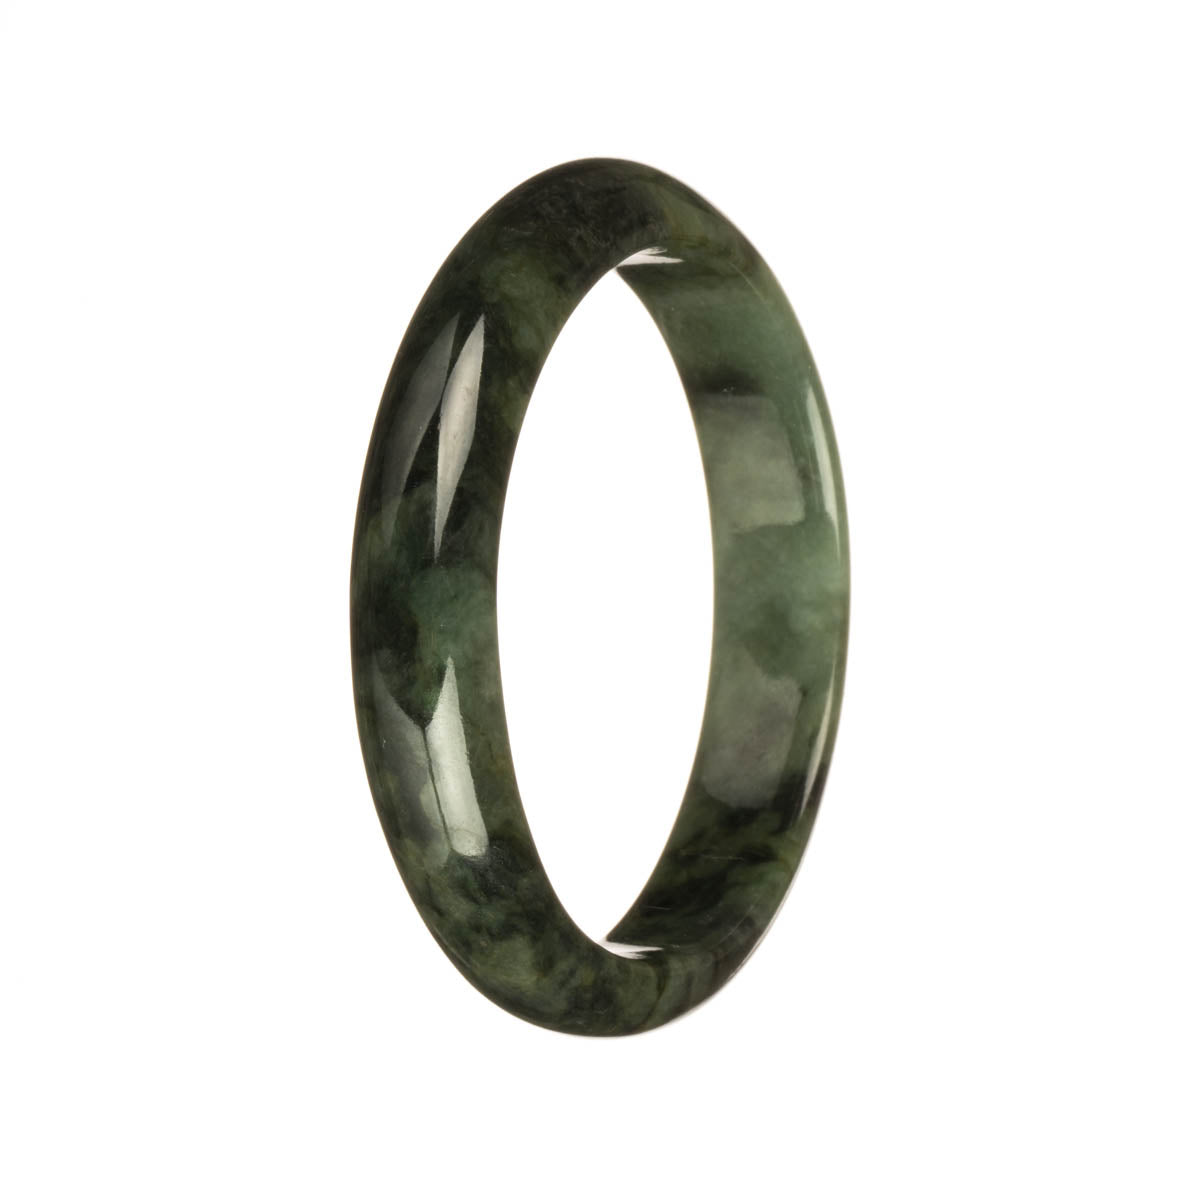 A half moon jadeite bracelet with genuine untreated olive green color and dark green patterns.